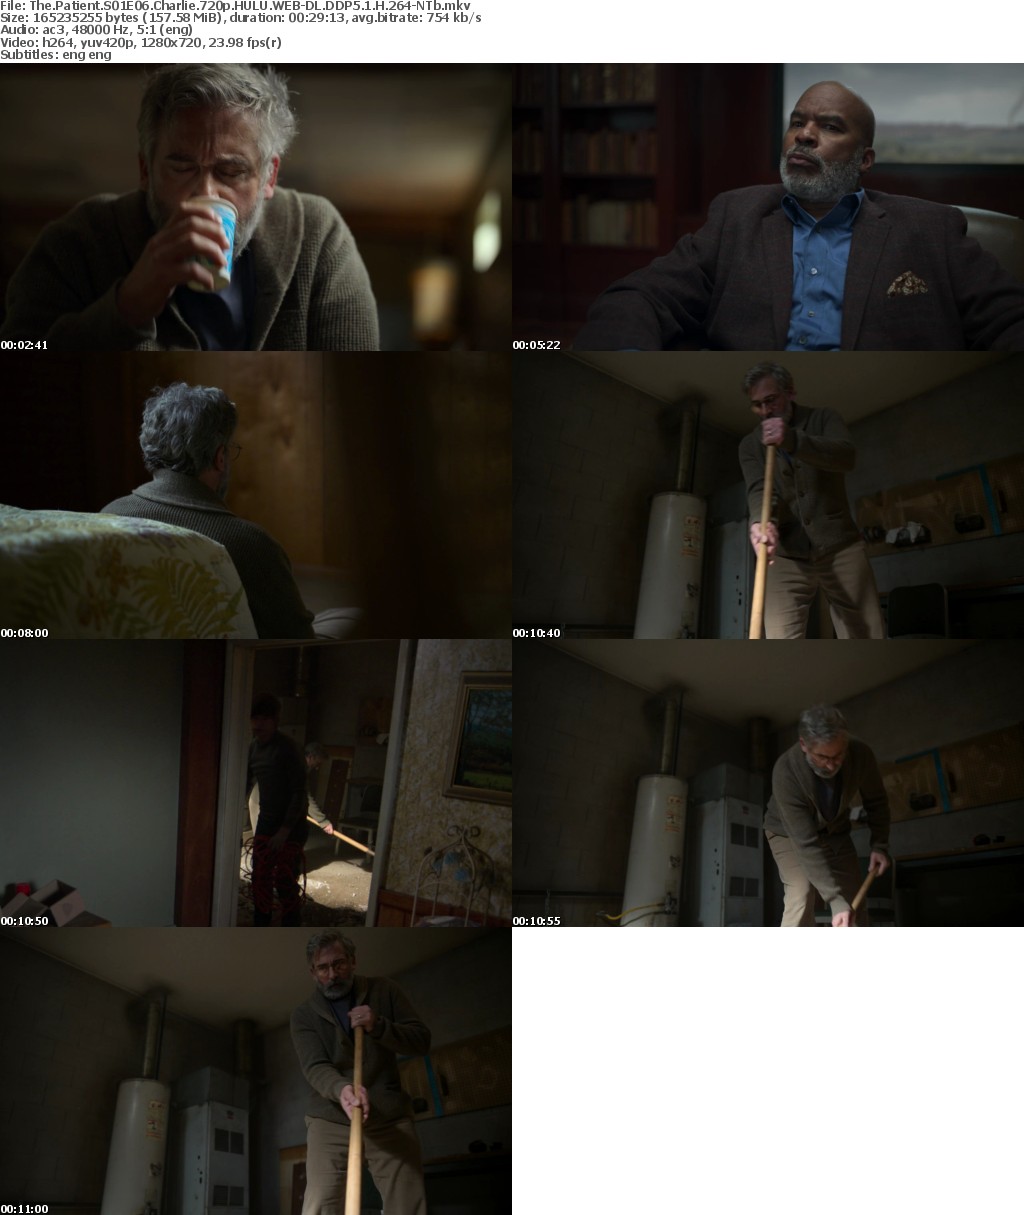 The Patient S01E06 Charlie 720p HULU WEBRip DDP5 1 x264-NTb